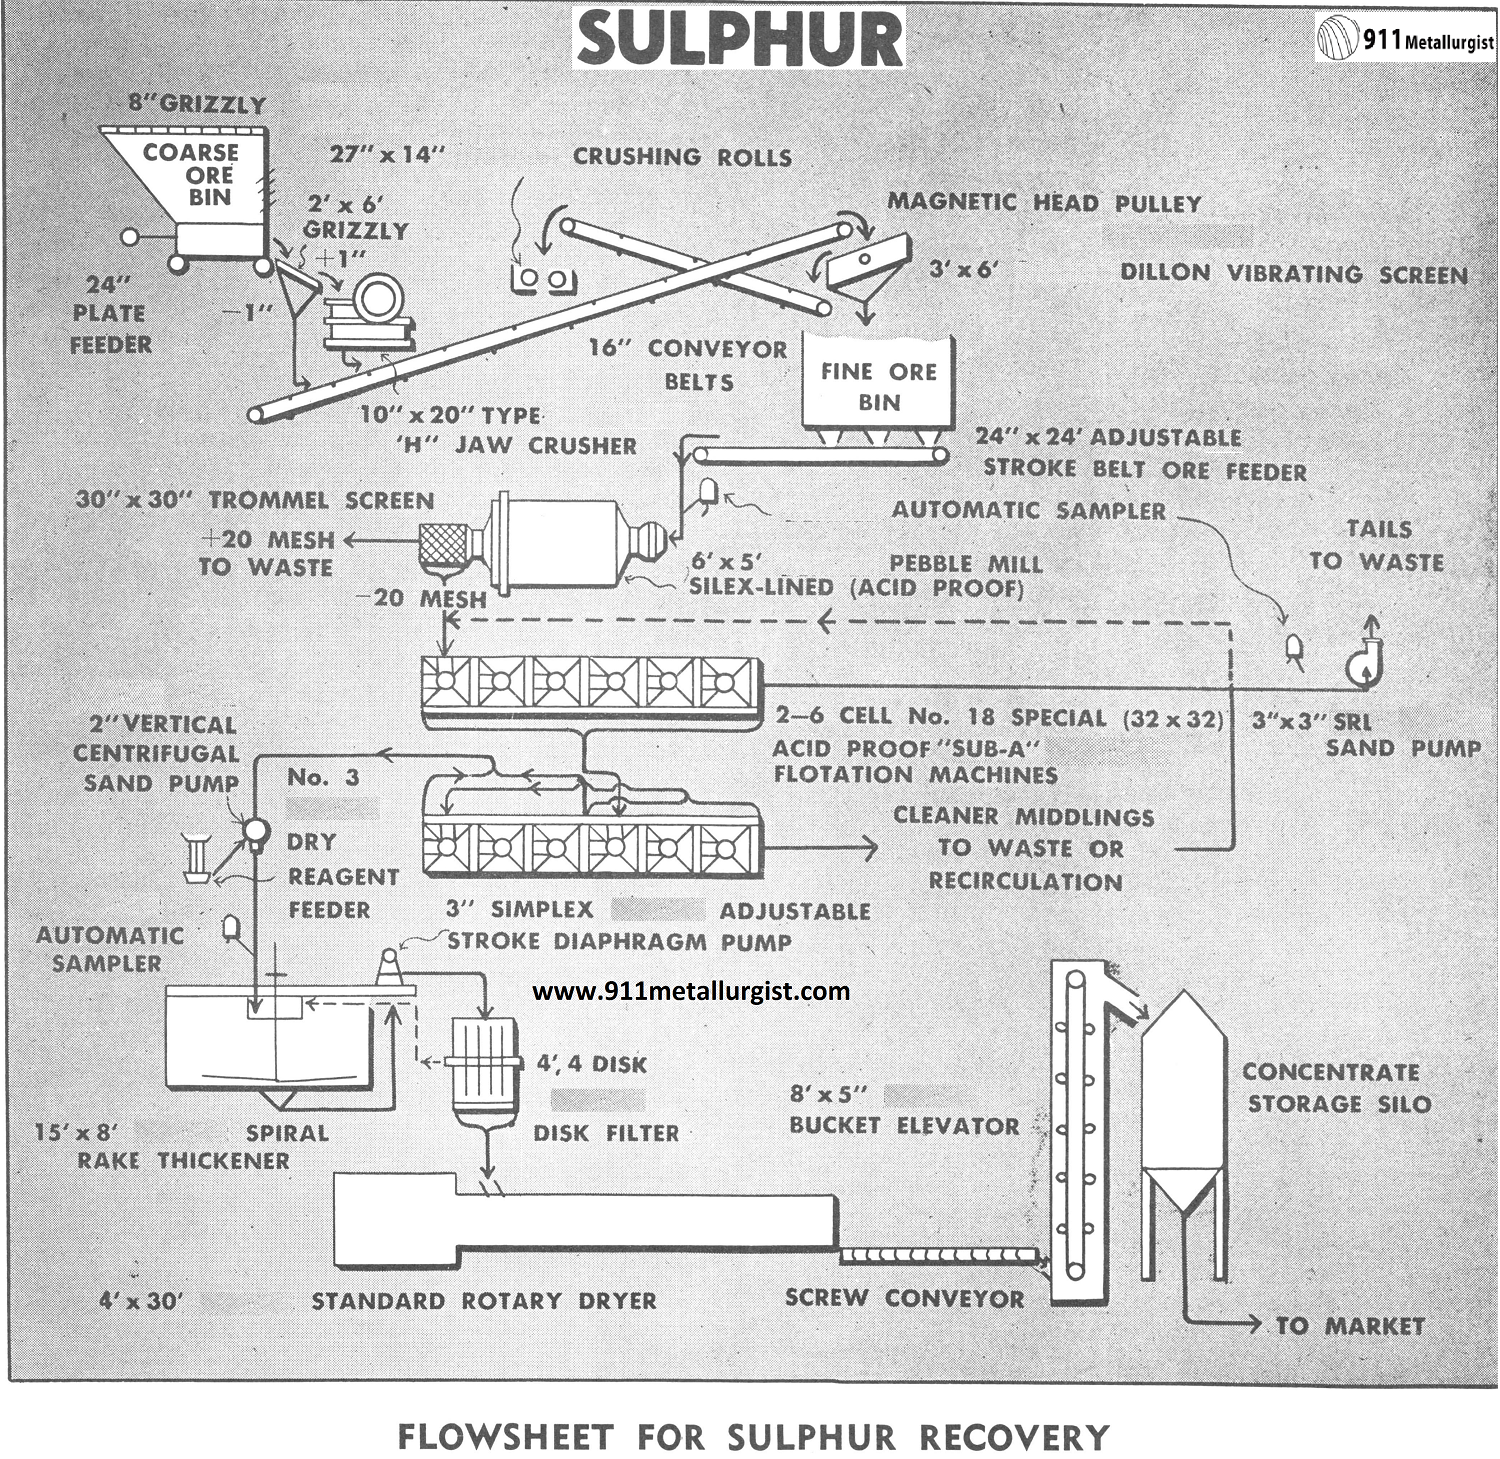 Flowsheet for Sulphur Recovery